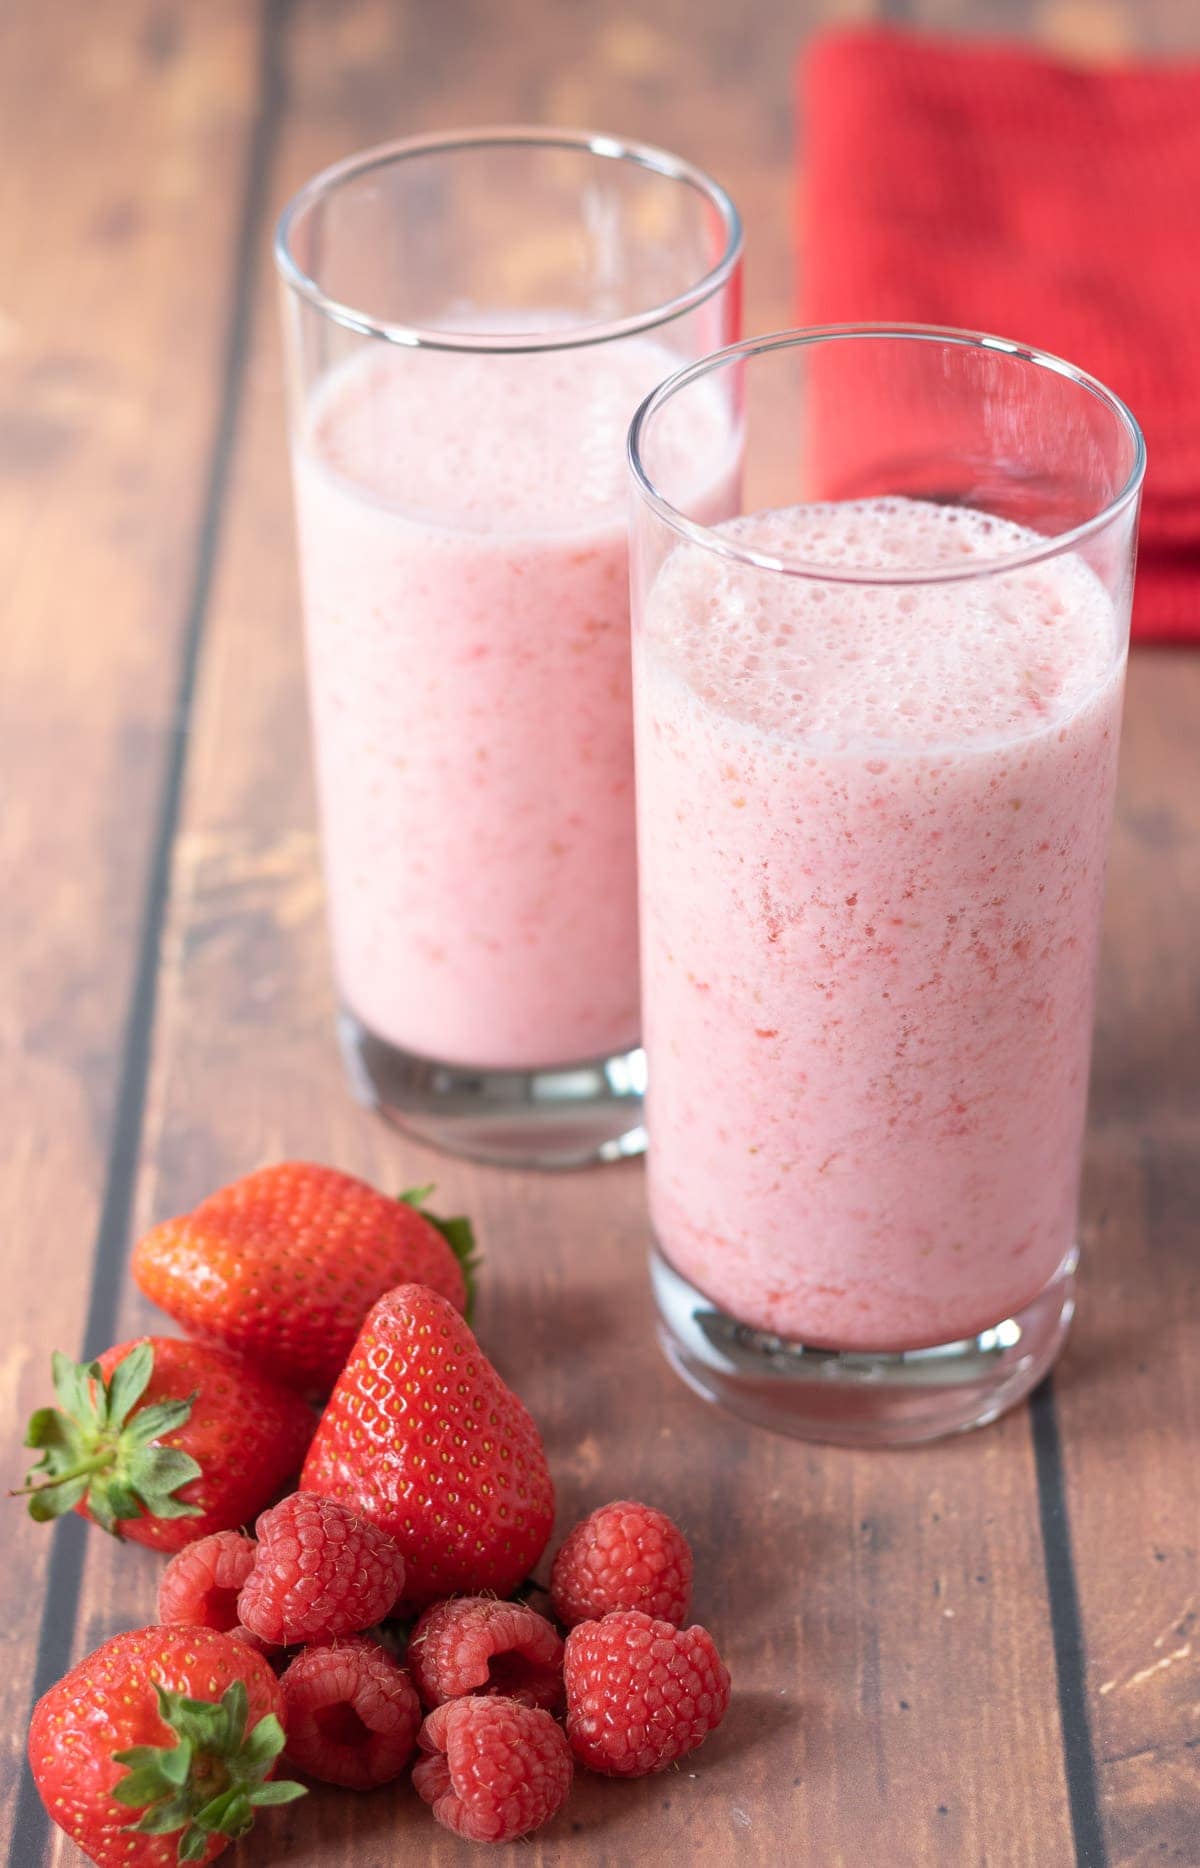 Two tall glasses of strawberry and raspberry smoothie in the center with a pile of strawberries and raspberries in front of the glasses. Serviette to the rear.